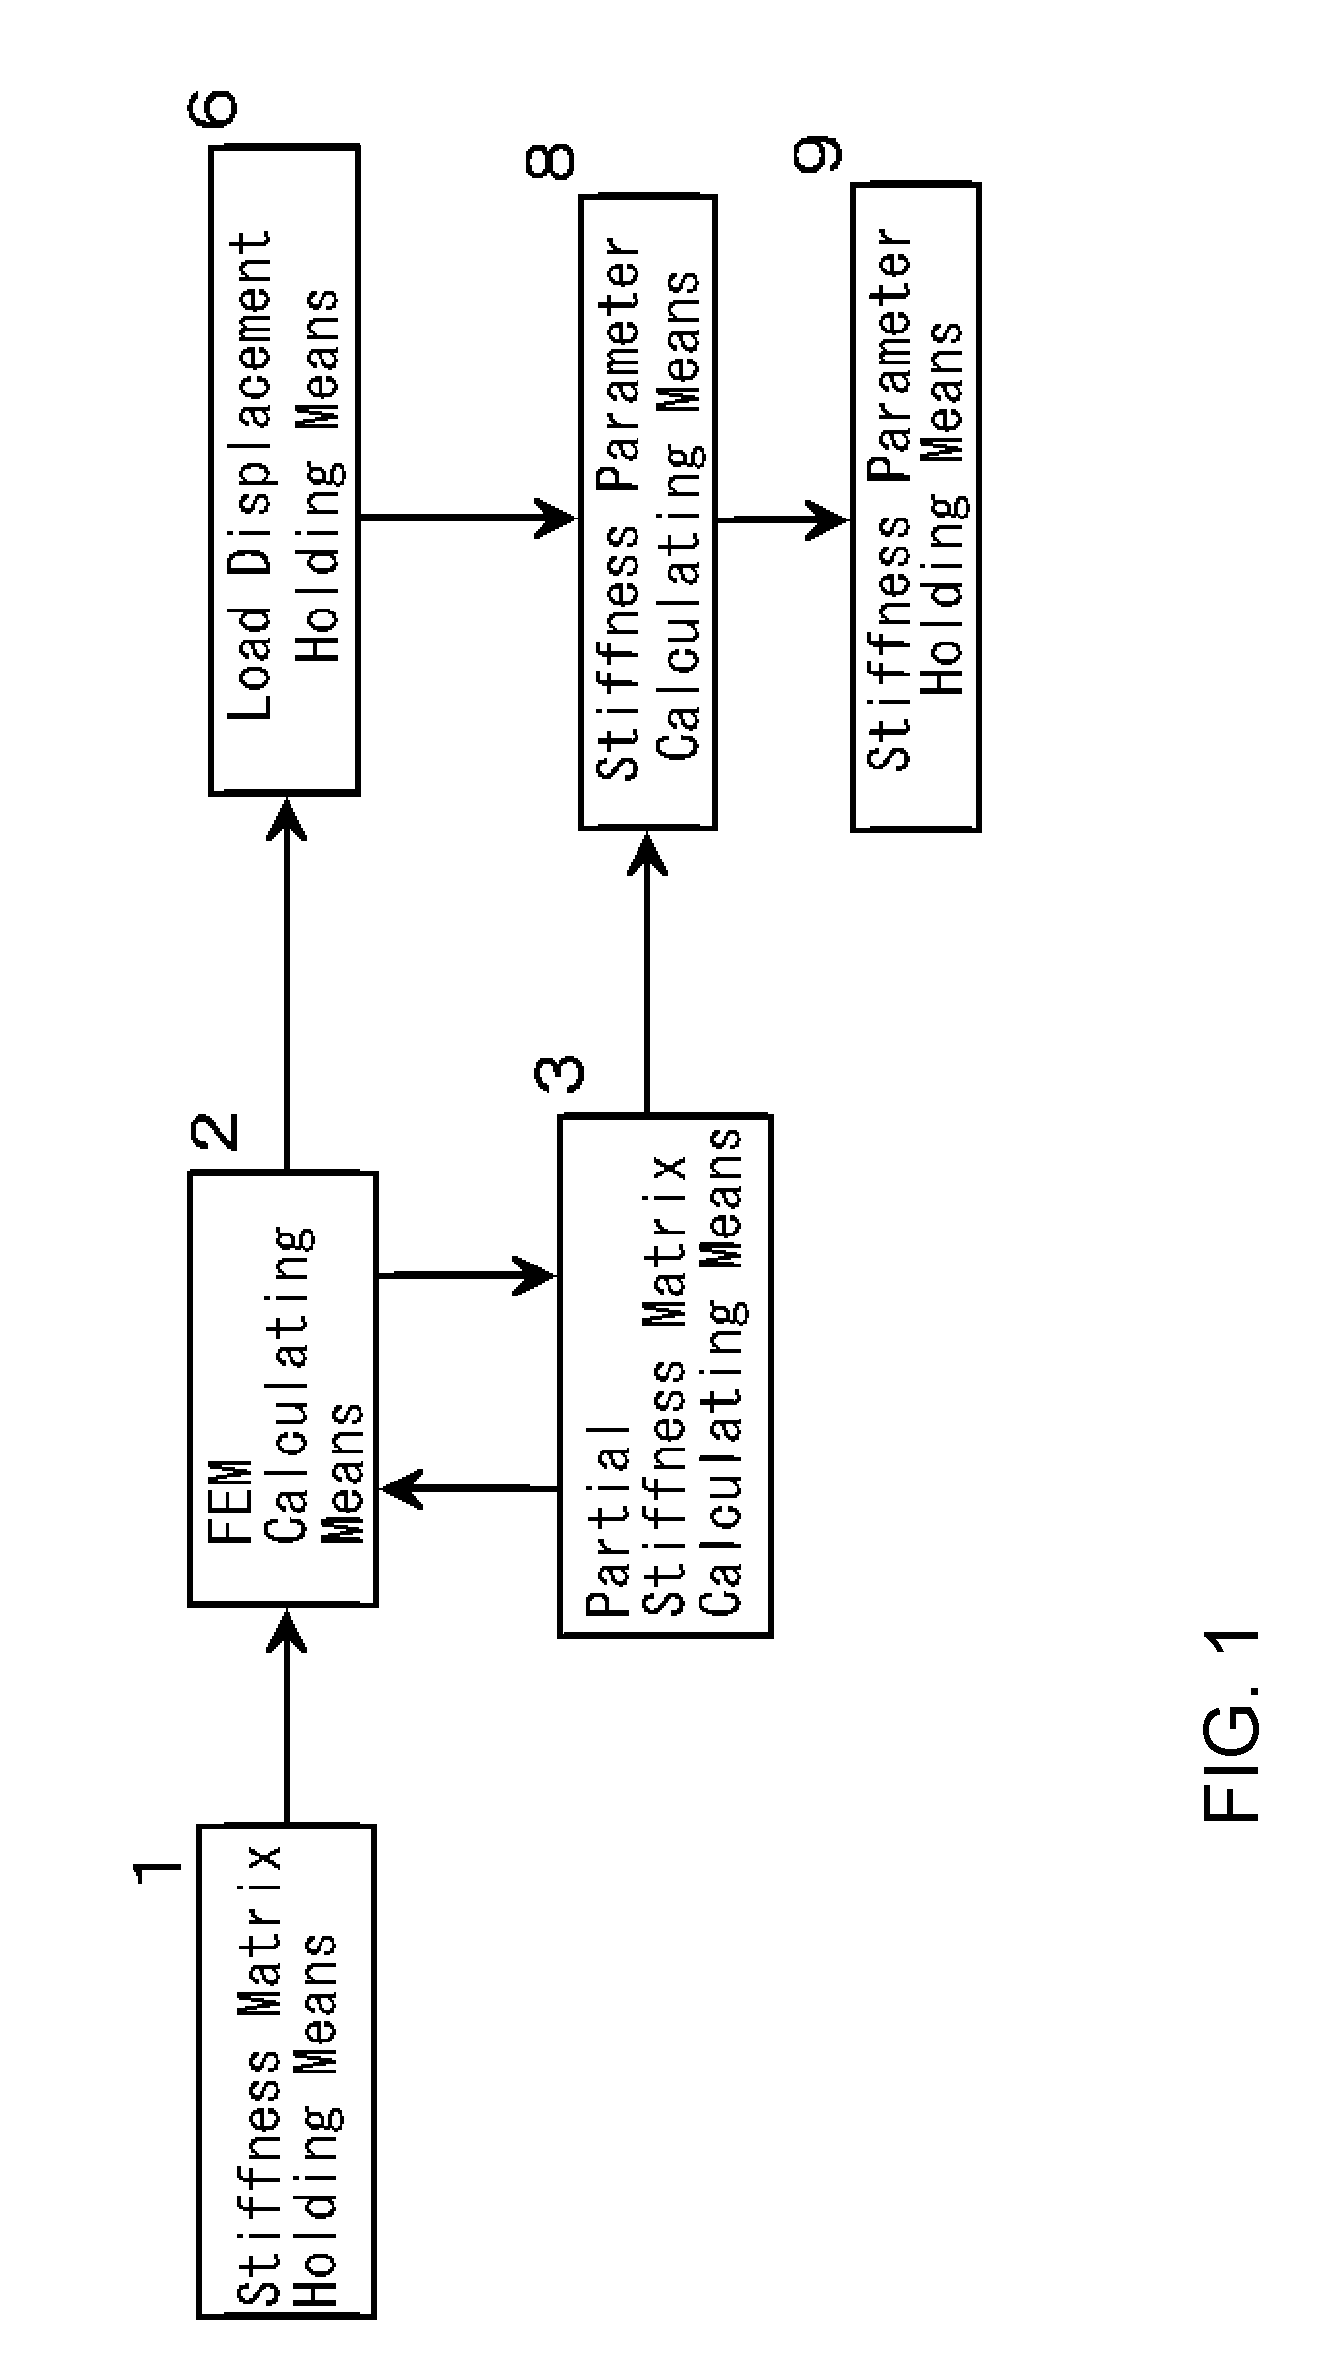 Numerical structural analysis system based on the load-transfer-path method